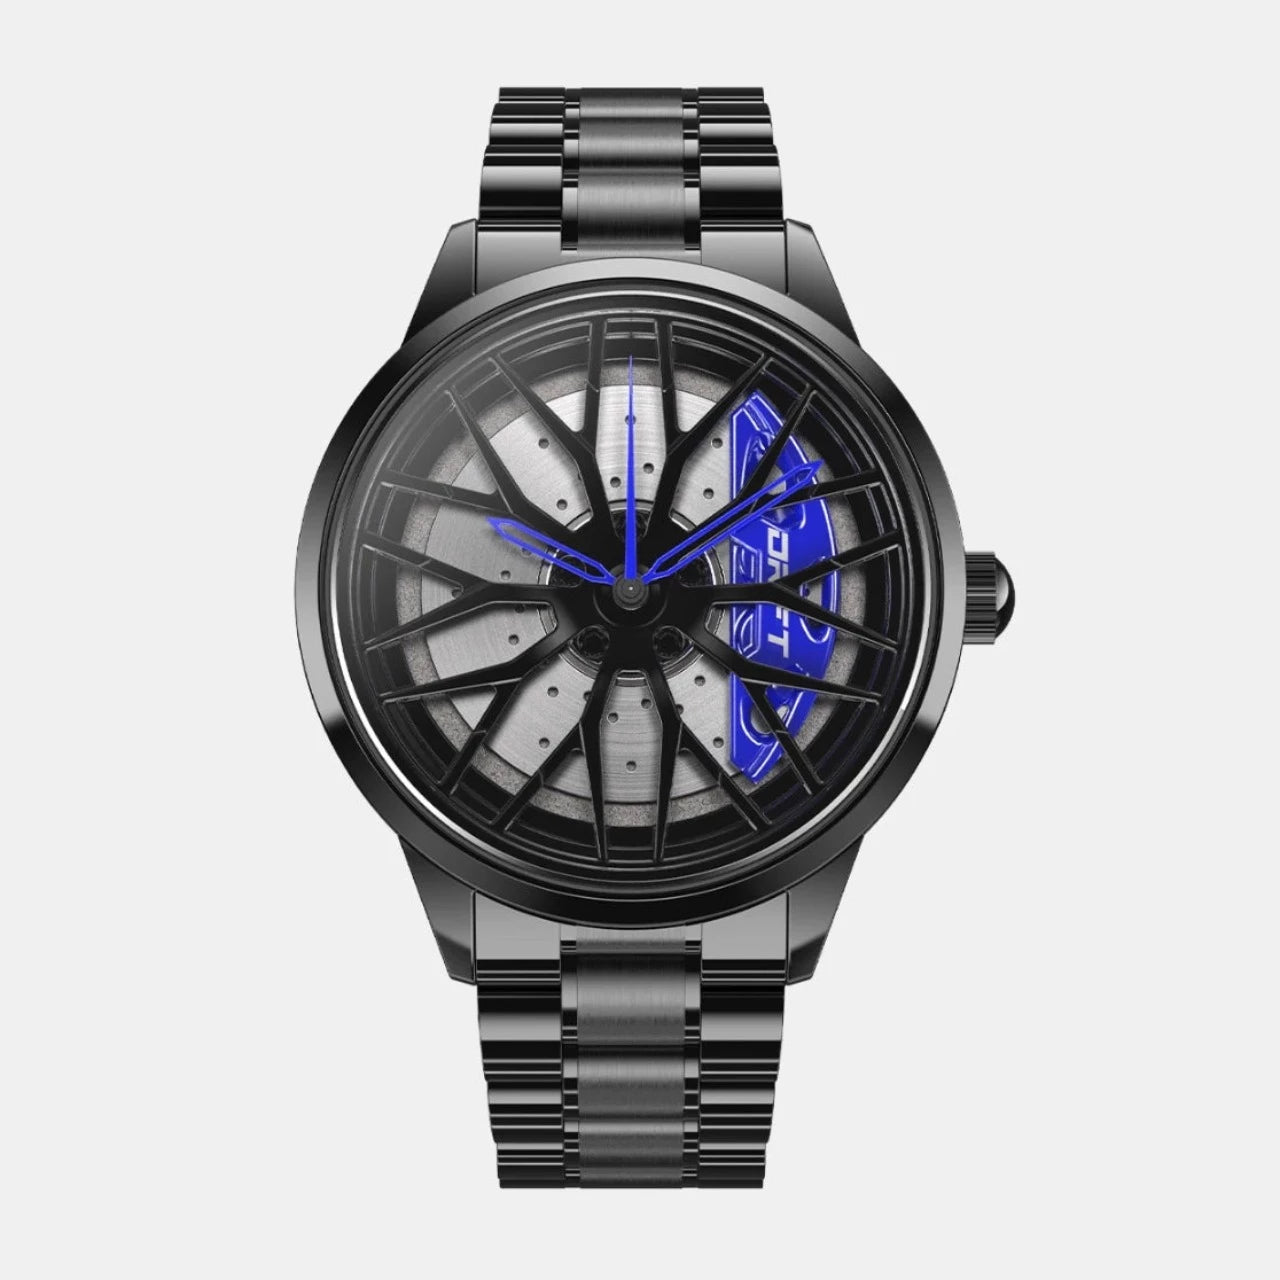 Illuminate your fashion with our vibrant blue Motorsport Rim Watch! Precision-engineered by a German startup, these watches are tailored for motorsport, tuning, and auto aficionados. Get ready to ignite your passion! #id_46744363008330